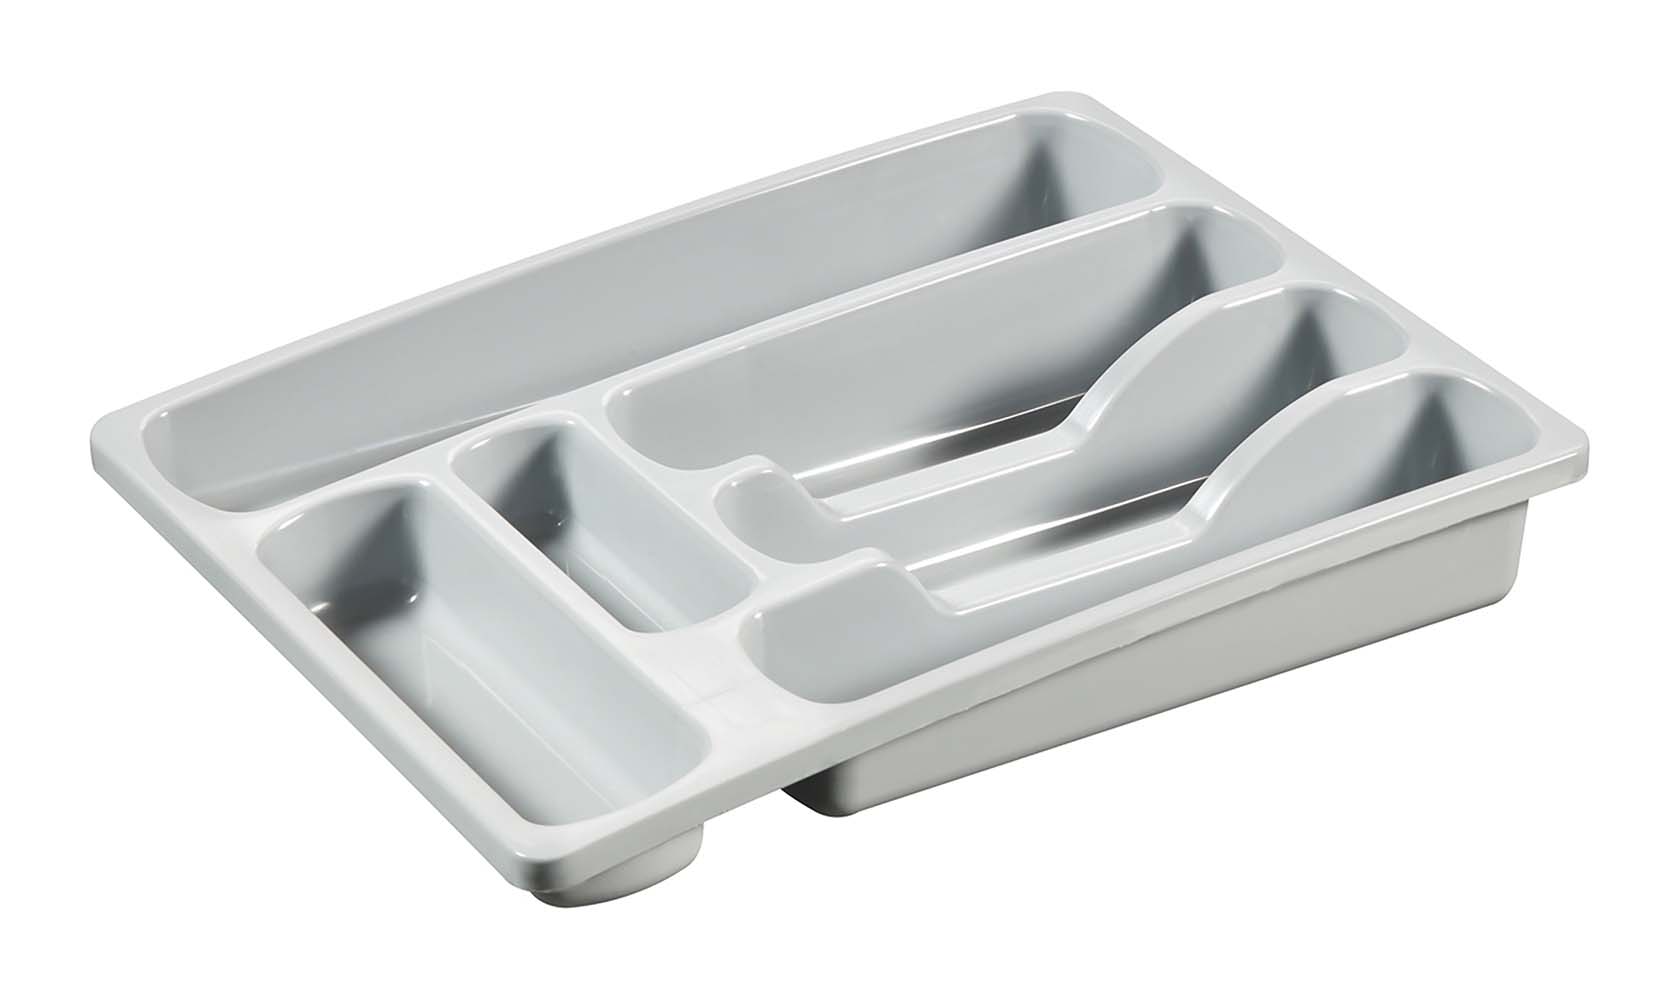 6302103 A sturdy 6-compartment cutlery tray. Ideal to store items compactly. The cutlery tray consists of 4 large compartments and 2 smaller ones.